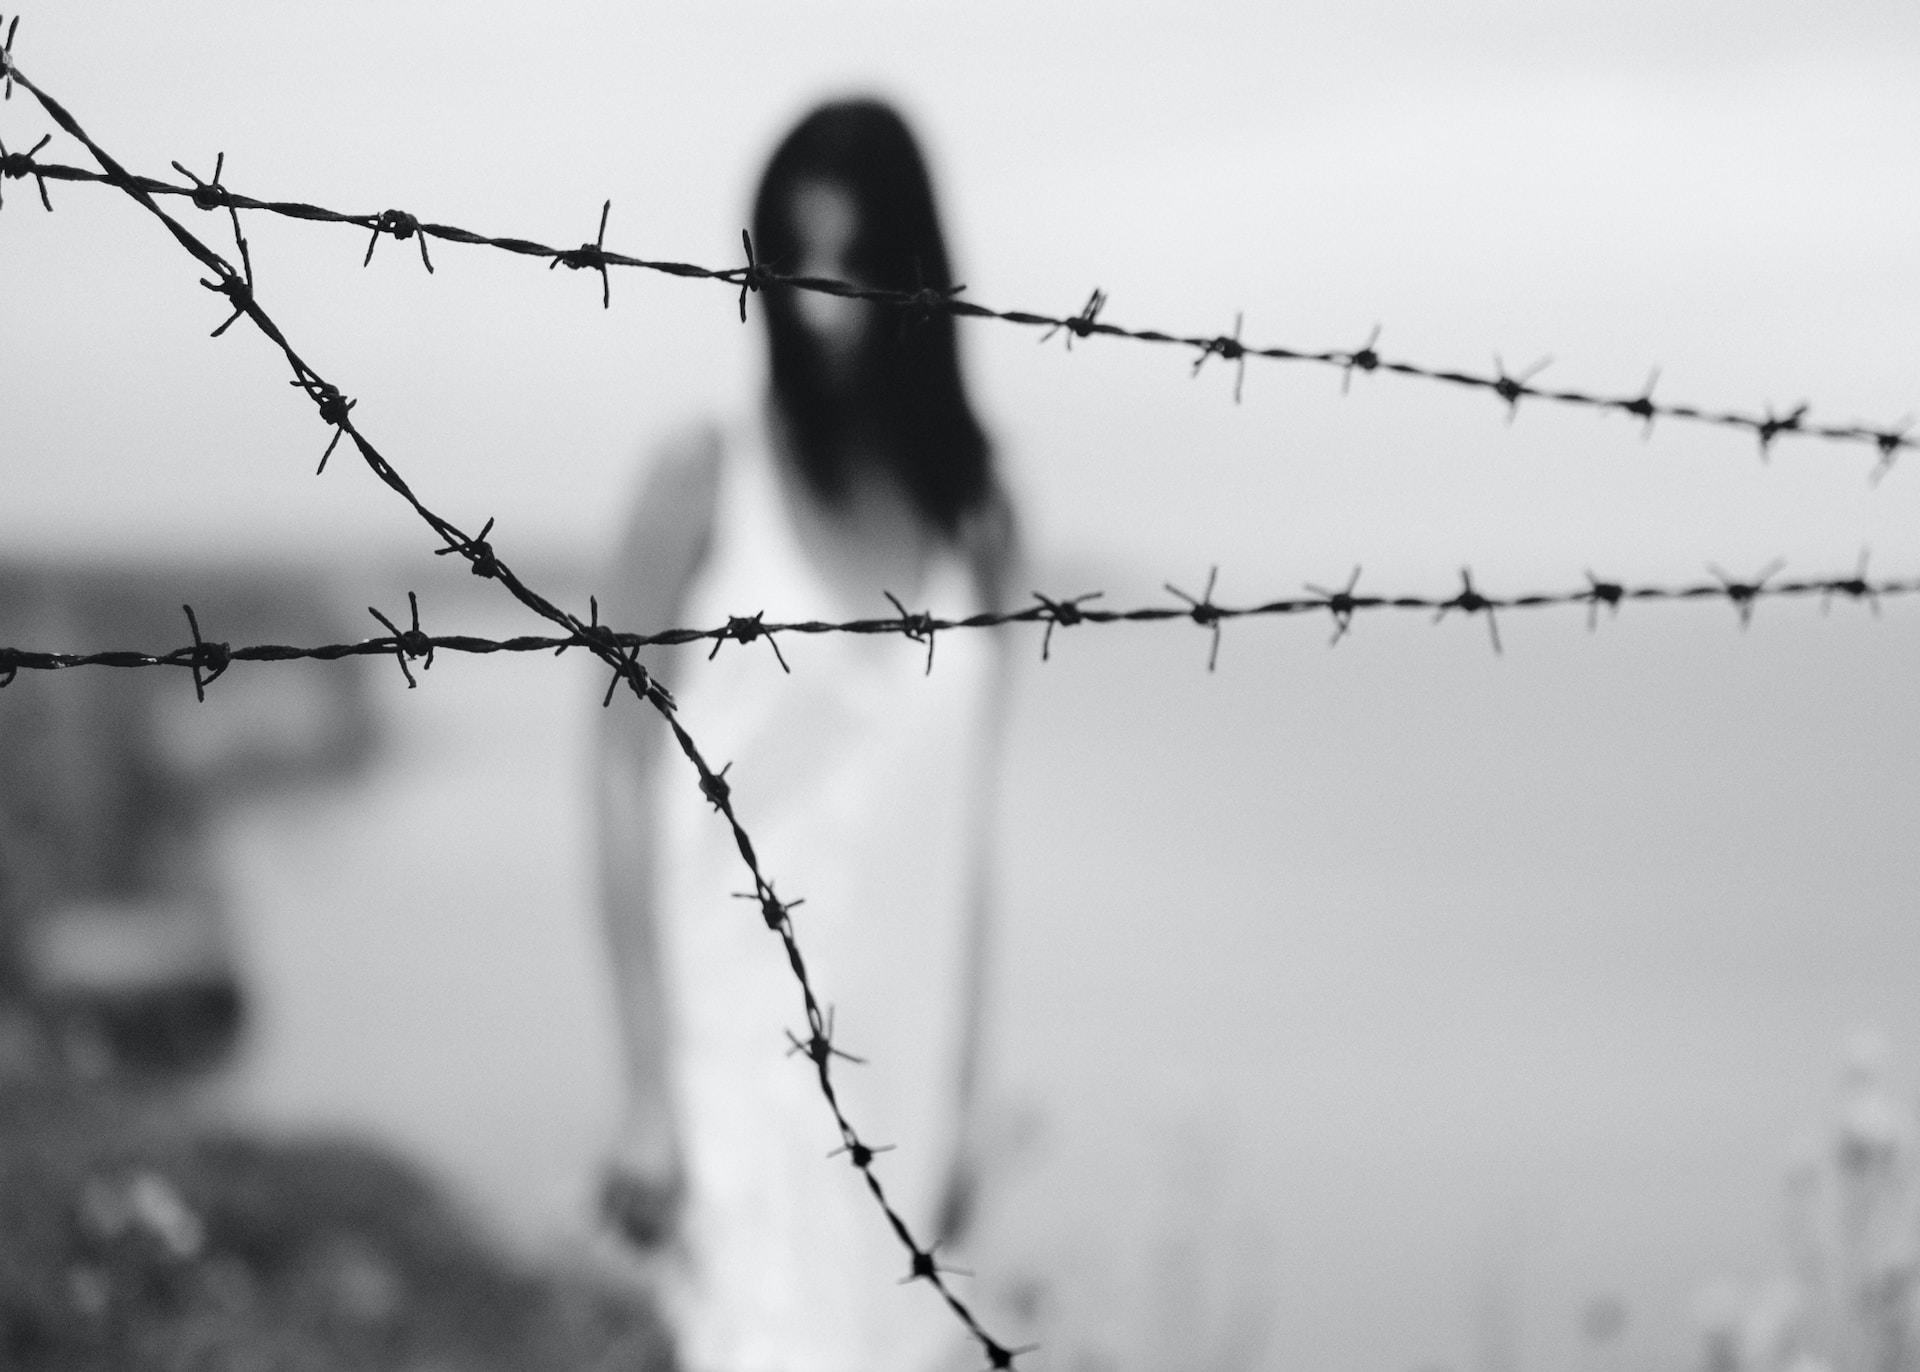 Blurred image of a distant woman through barbed wire